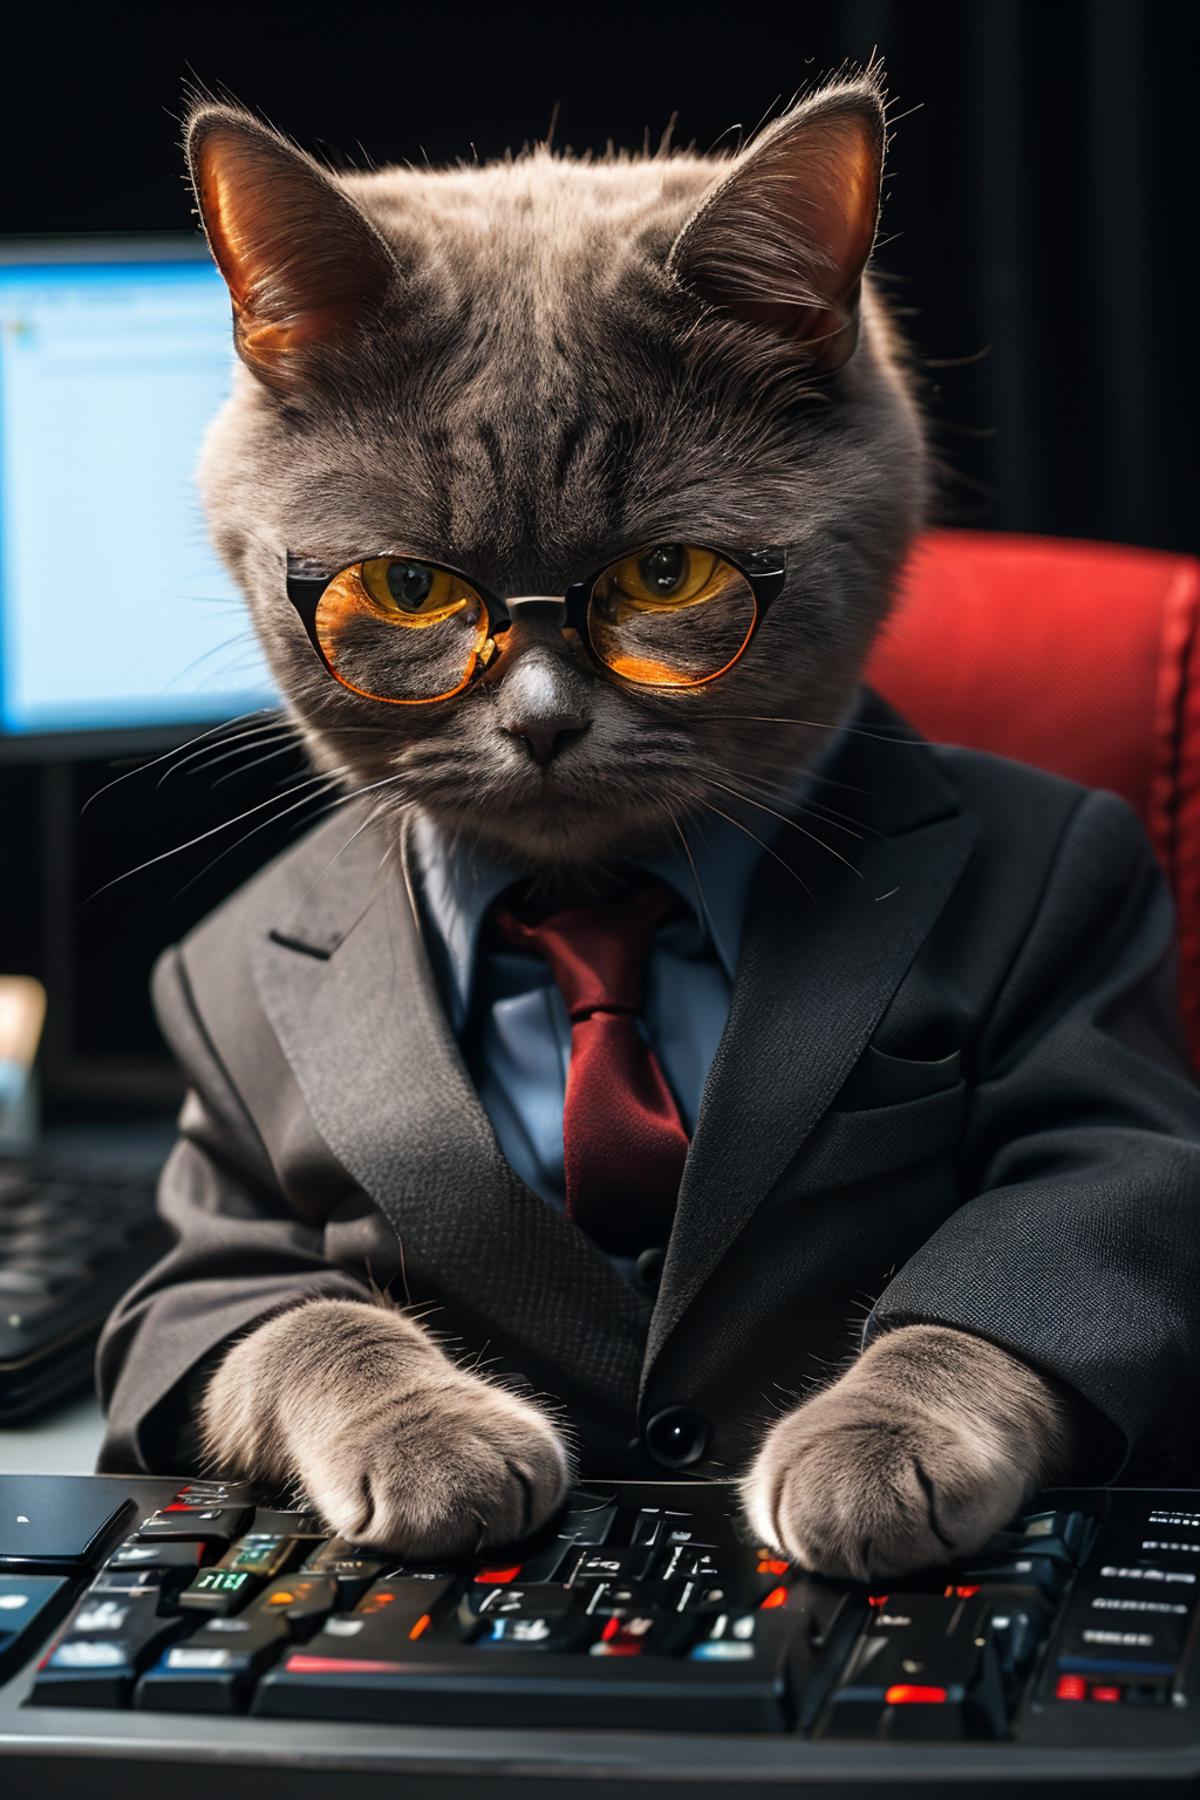 Cat in a Suit and Glasses Posing in a Red Chair in Front of a Computer Monitor